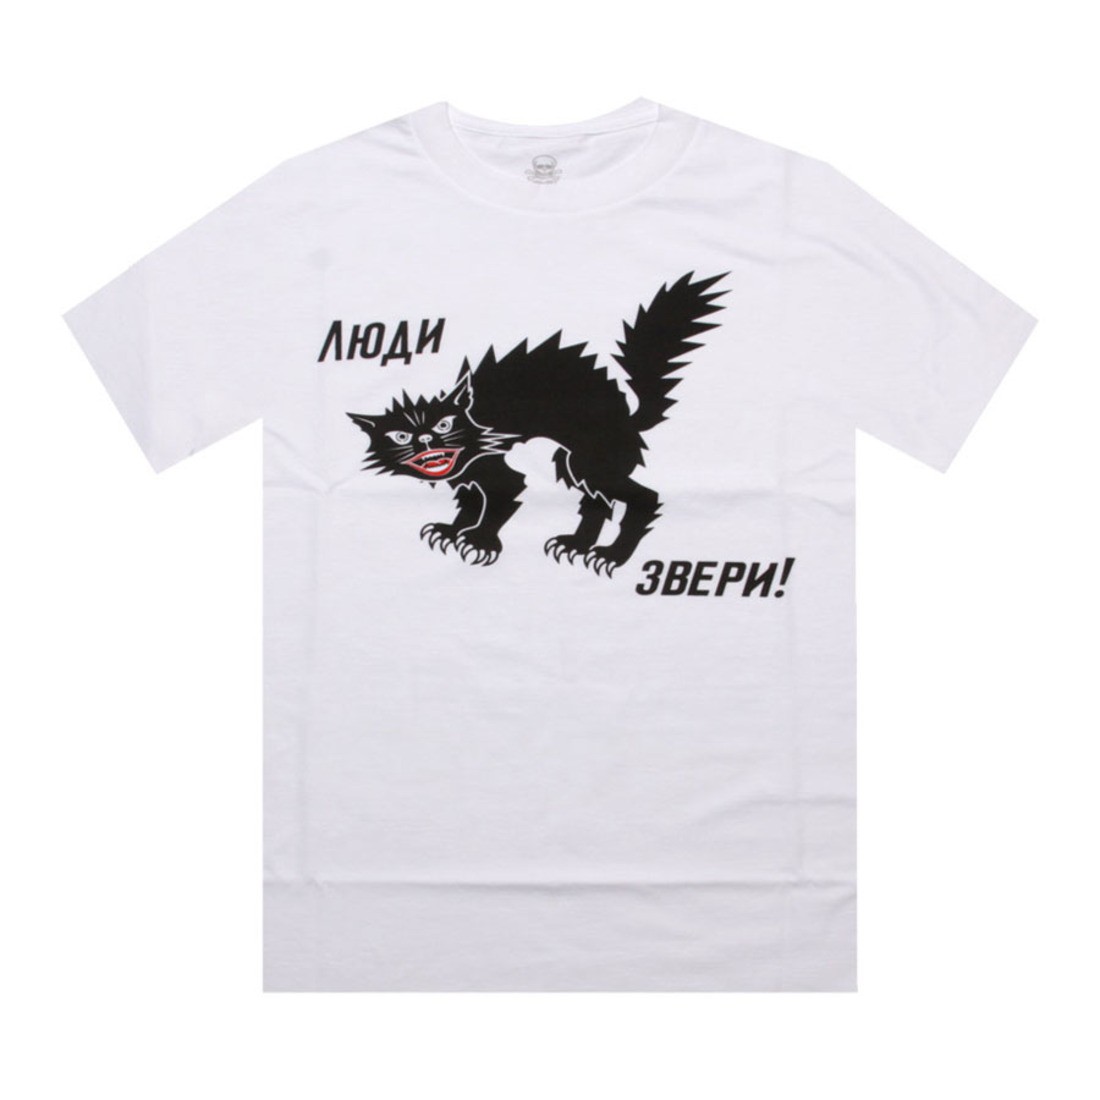 SSUR People Are Animals Tee (white)